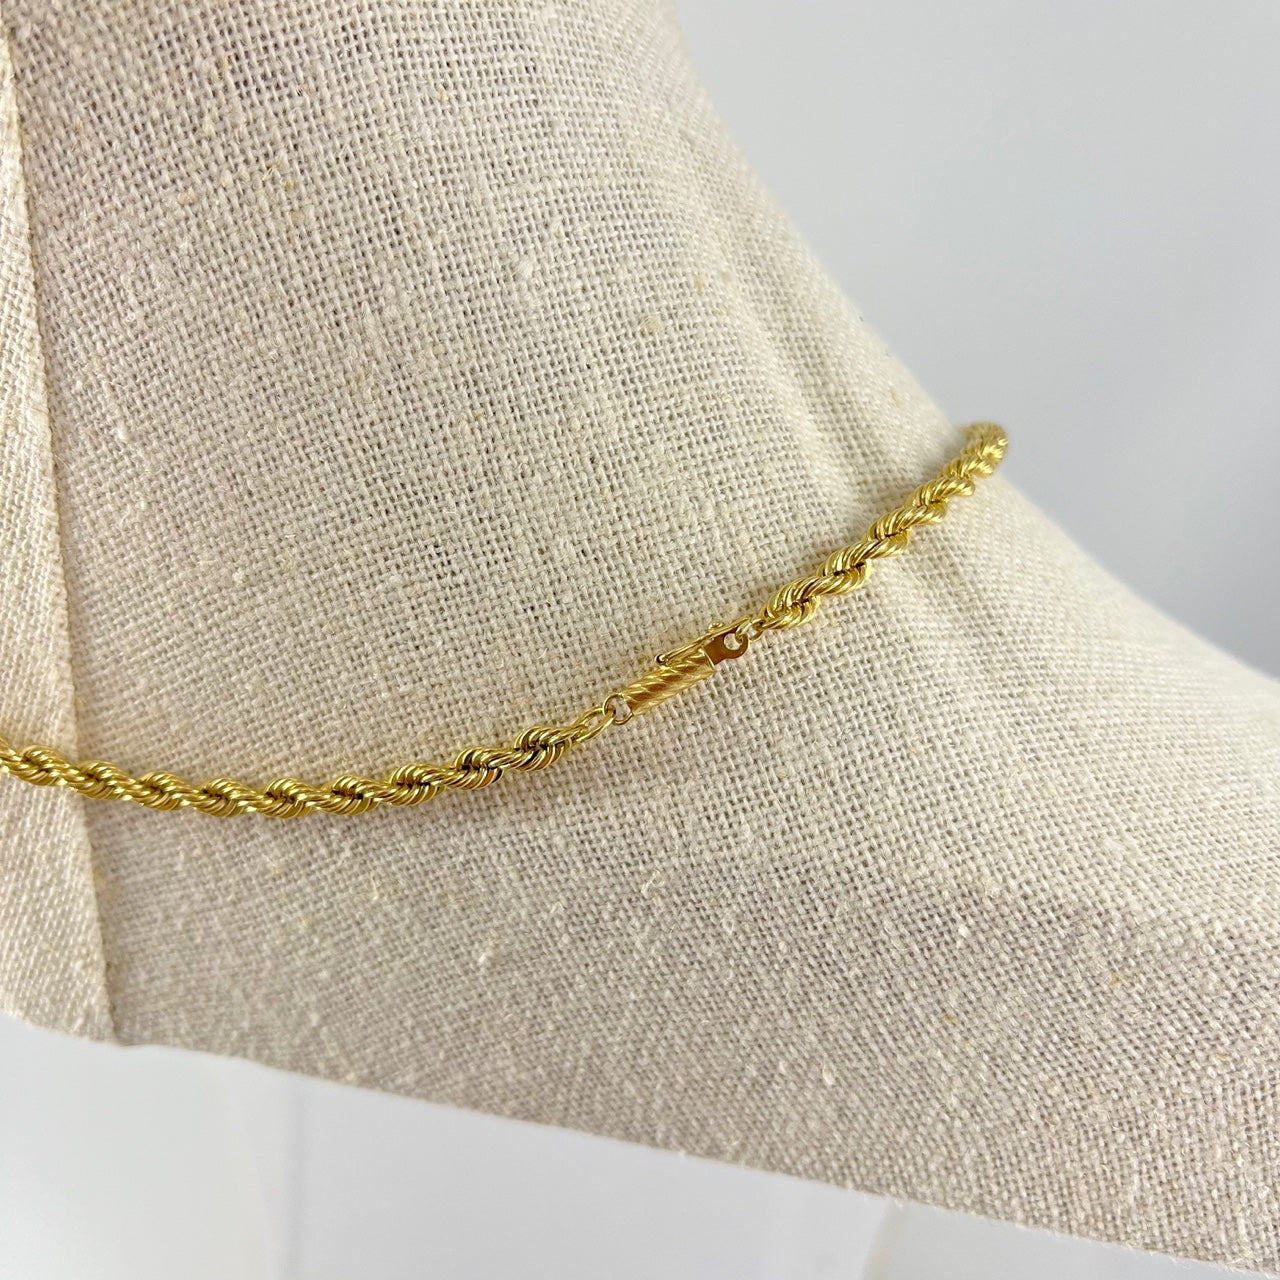 14k Solid yellow Gold Rope Chain Necklace 22"[14K Solid Gold]